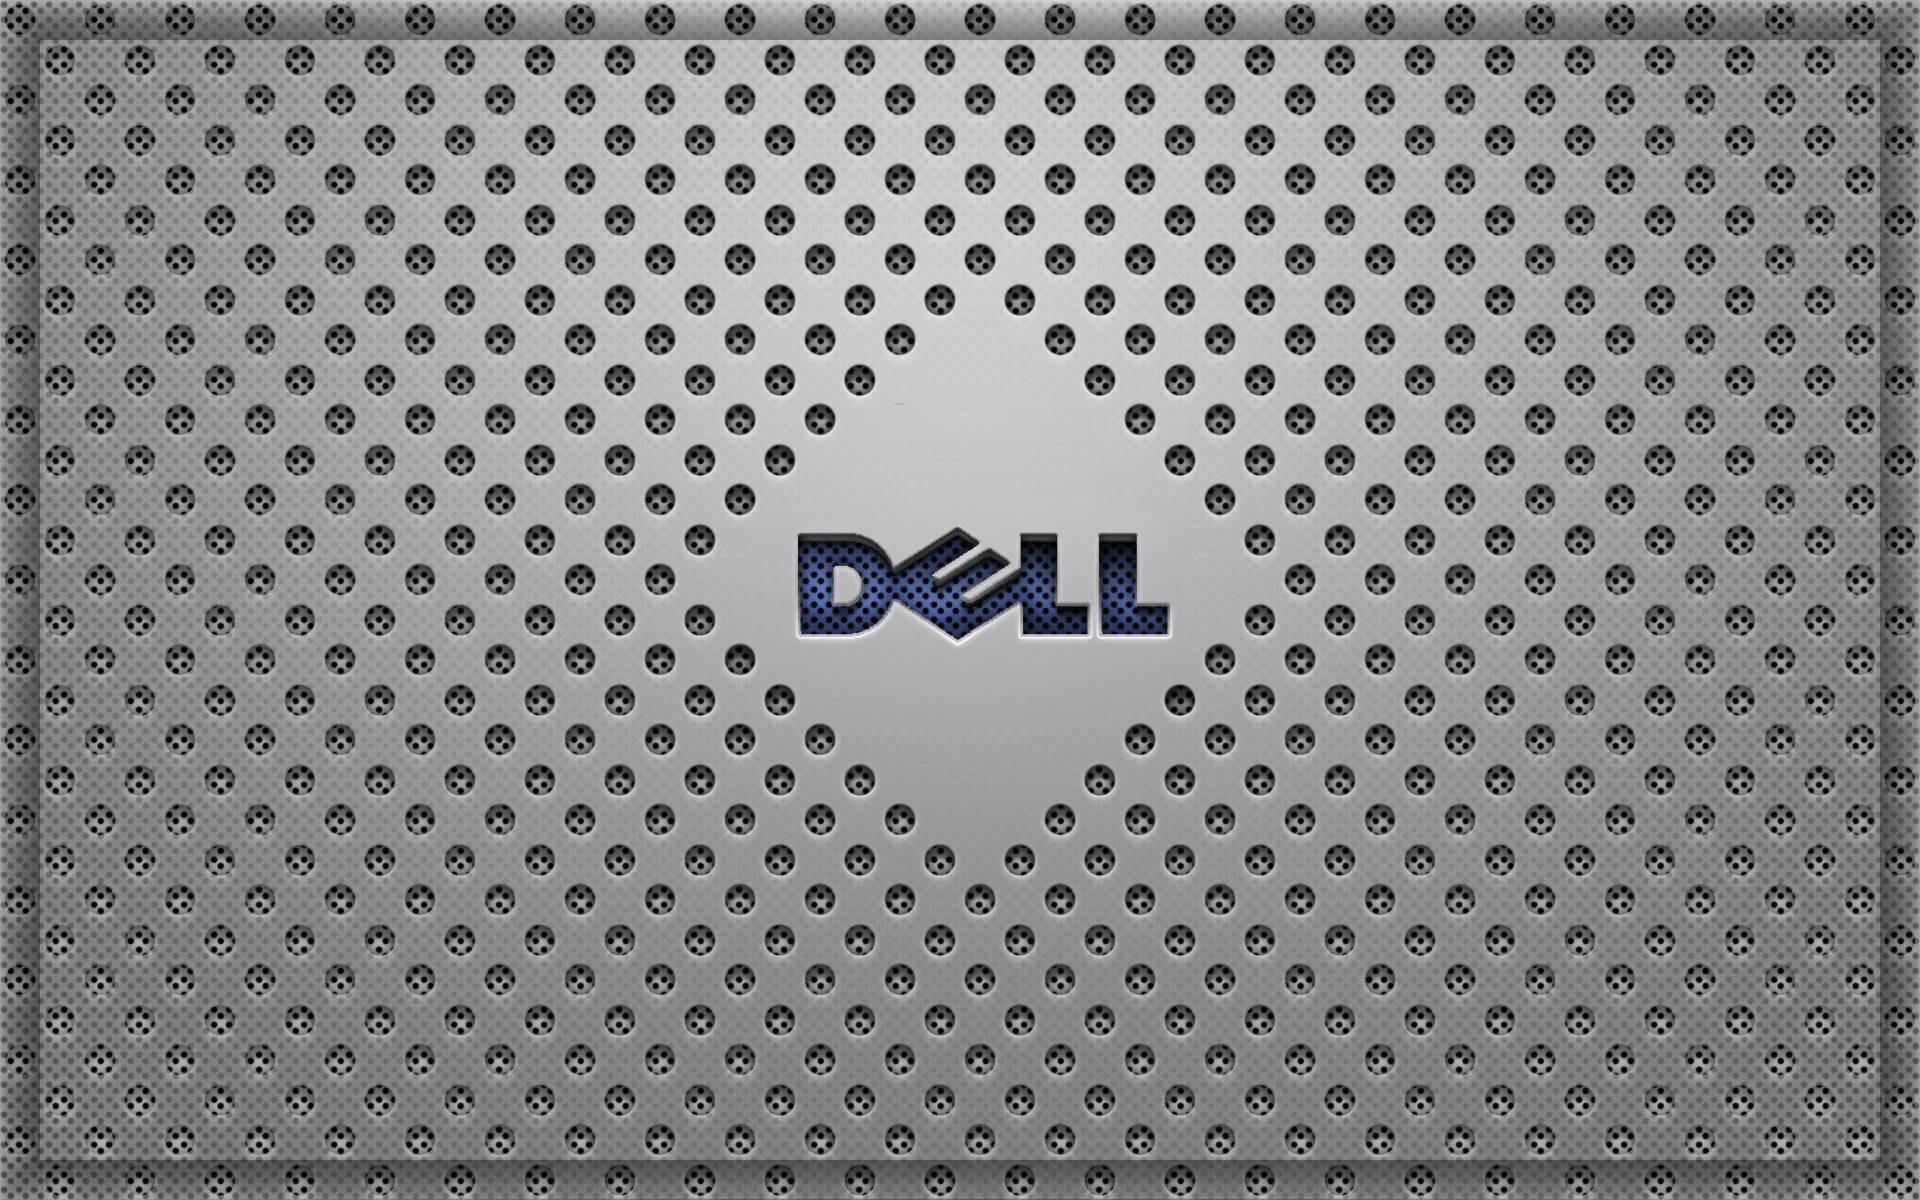 Dell Laptop Silver Mesh Background